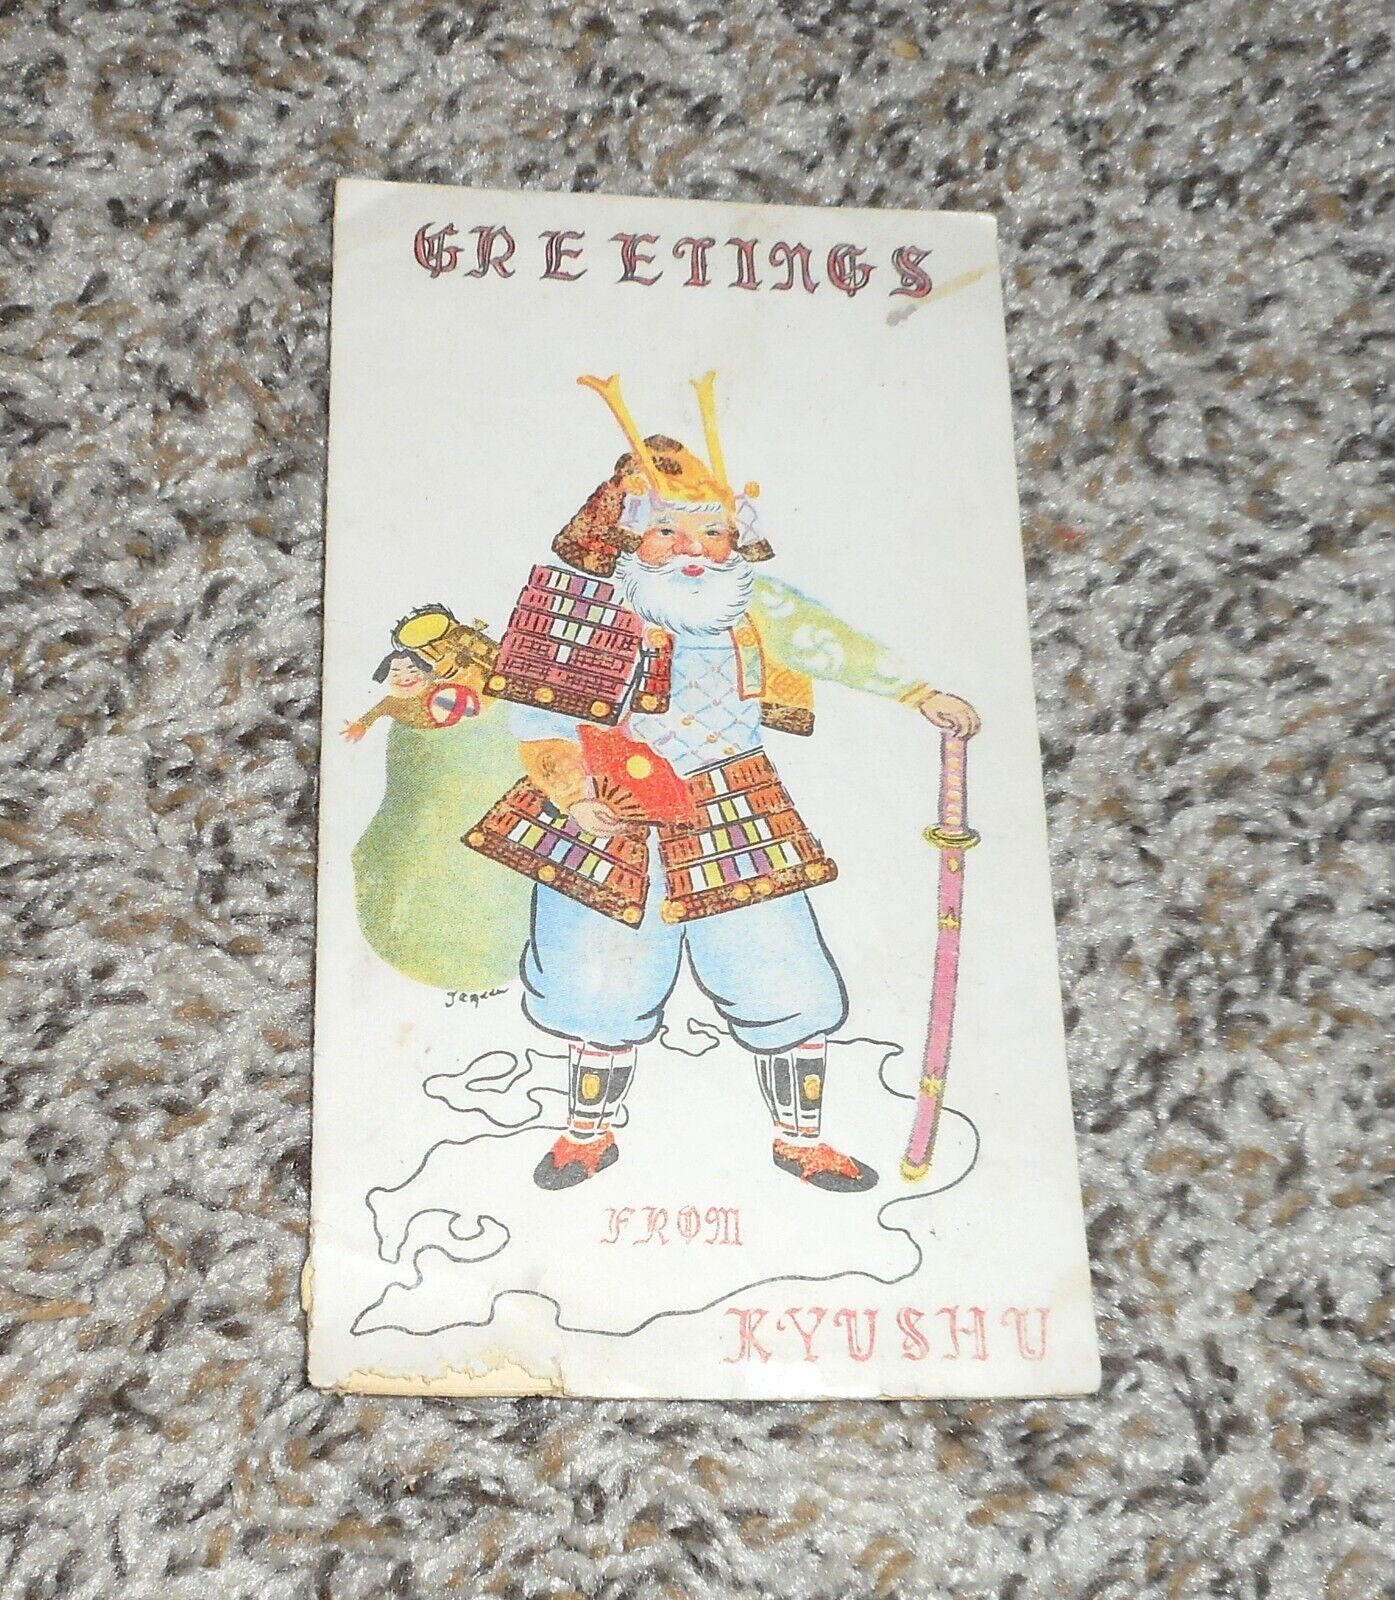 ANTIQUE 24TH INFANTRY DIVISION KYUSHU JAPAN HOLIDAY GREETING CARD MILITARY